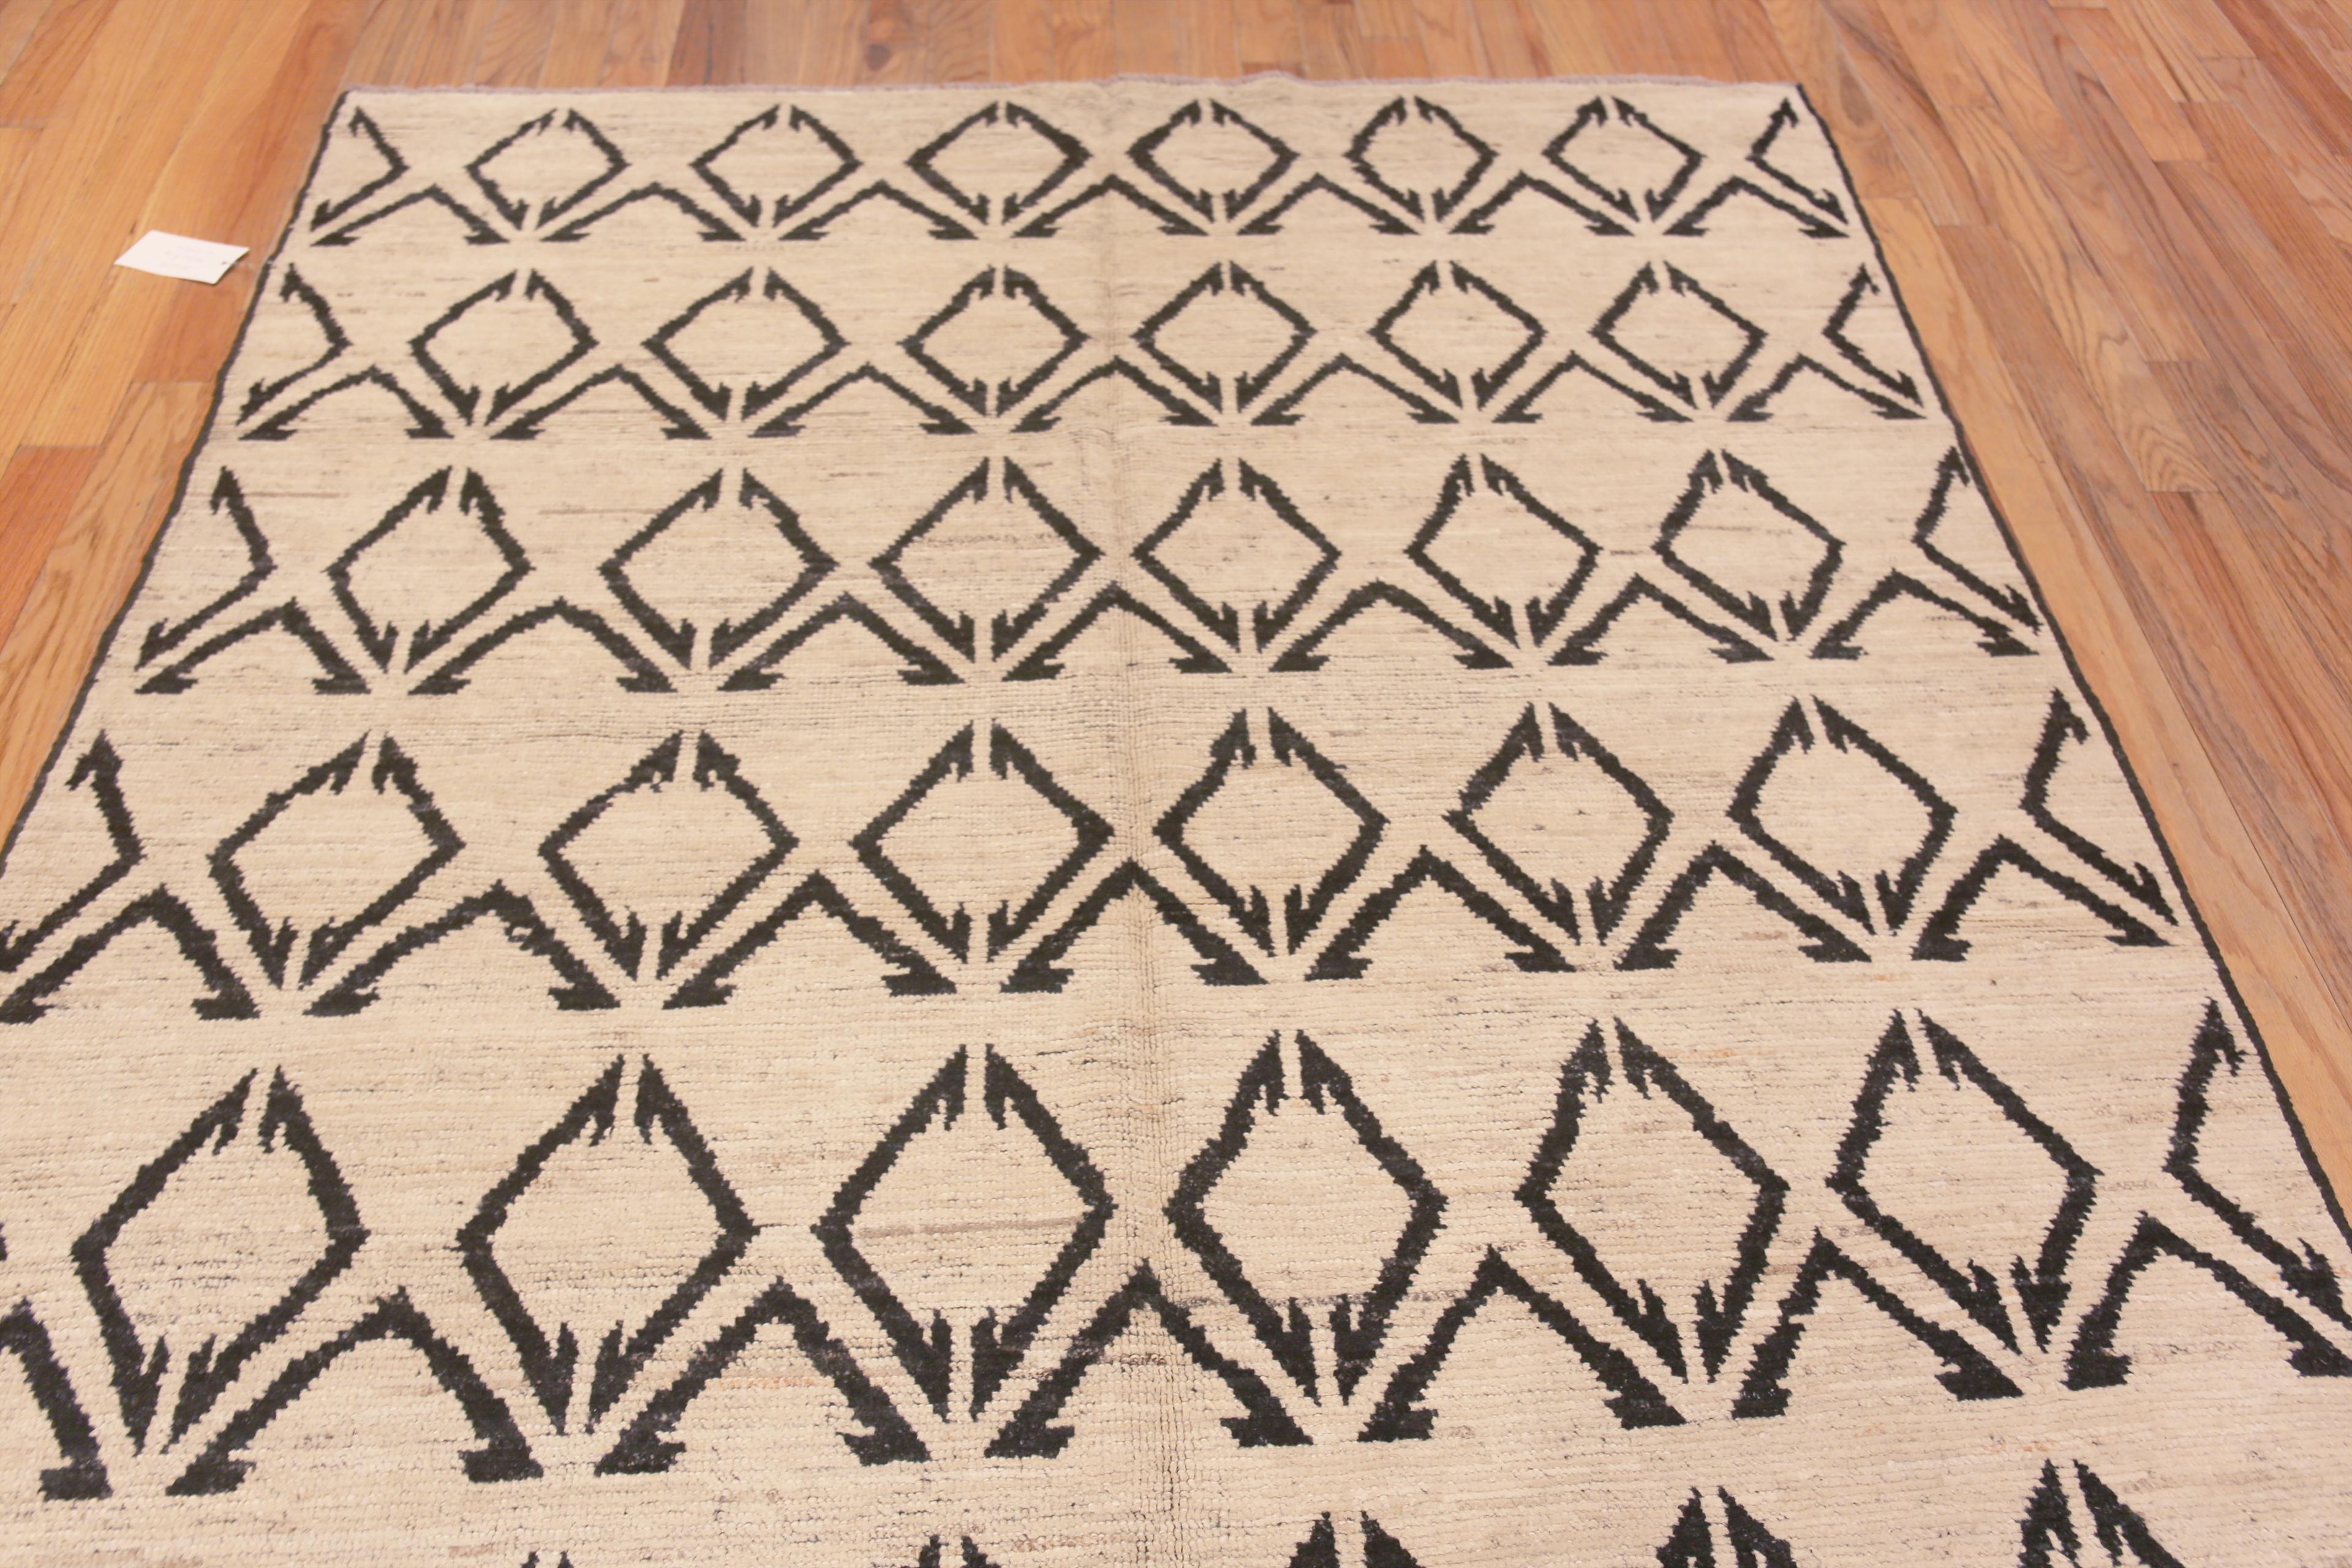 Central Asian Nazmiyal Collection Bold Charcoal Tribal Geometric Modern Area Rug 6'4